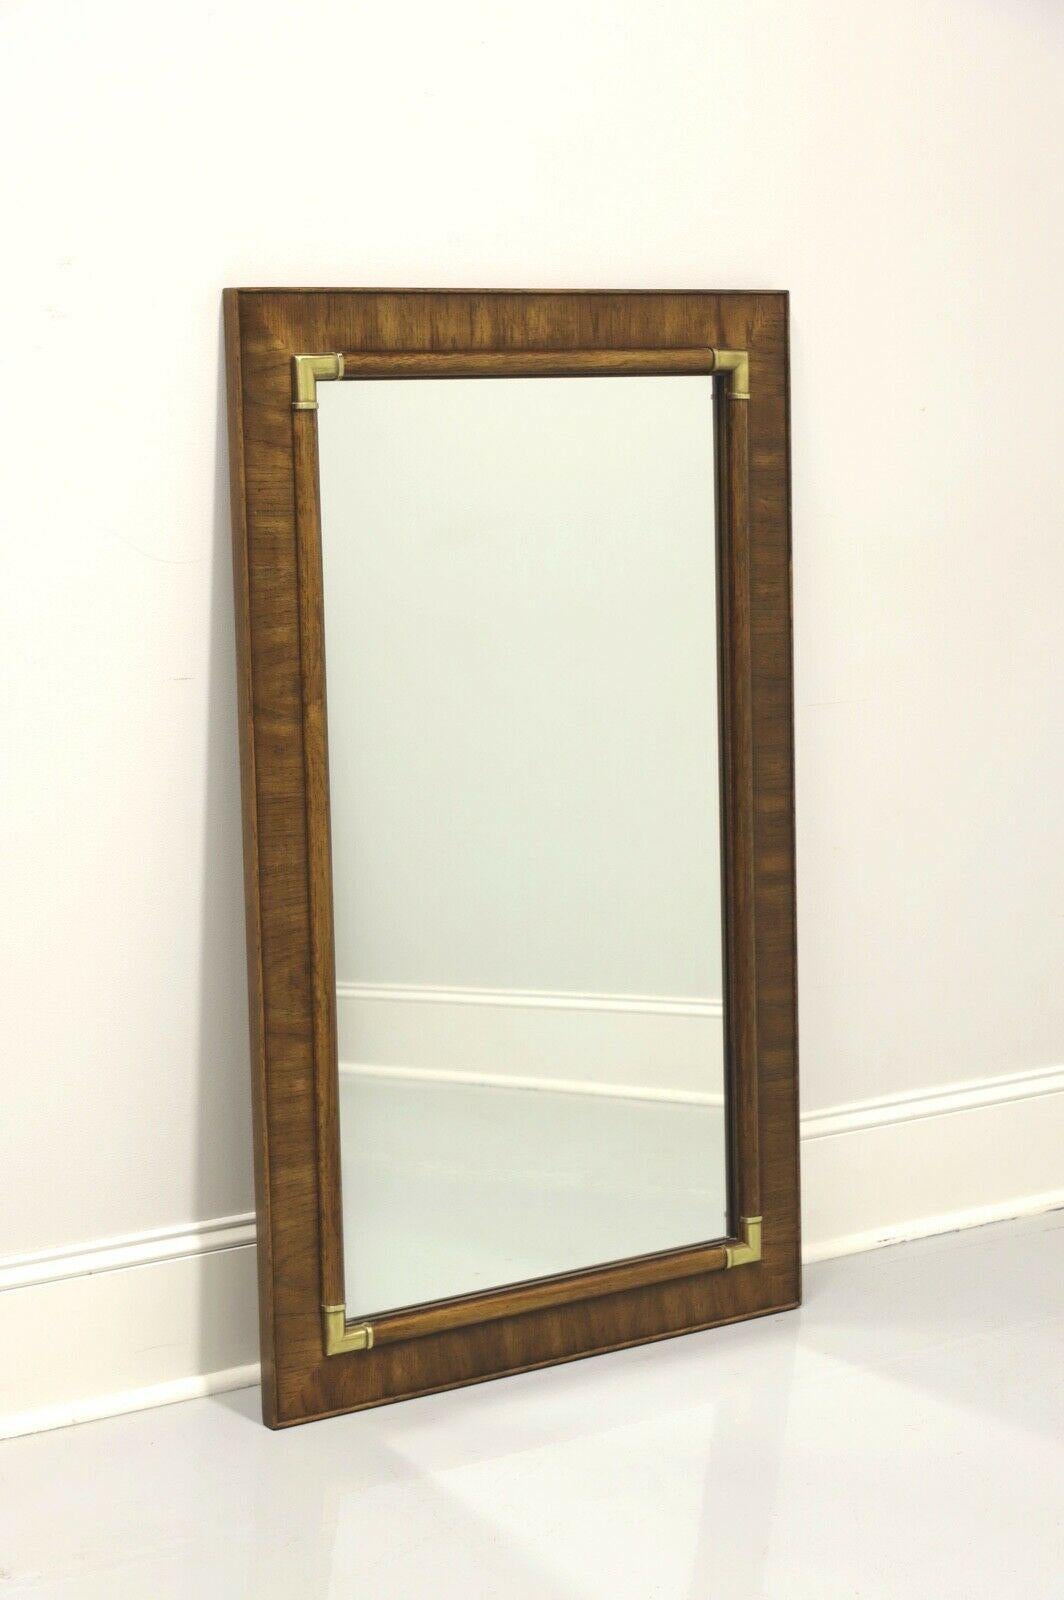 DREXEL Accolade Campaign Style Brass Accents Wall Mirror 3